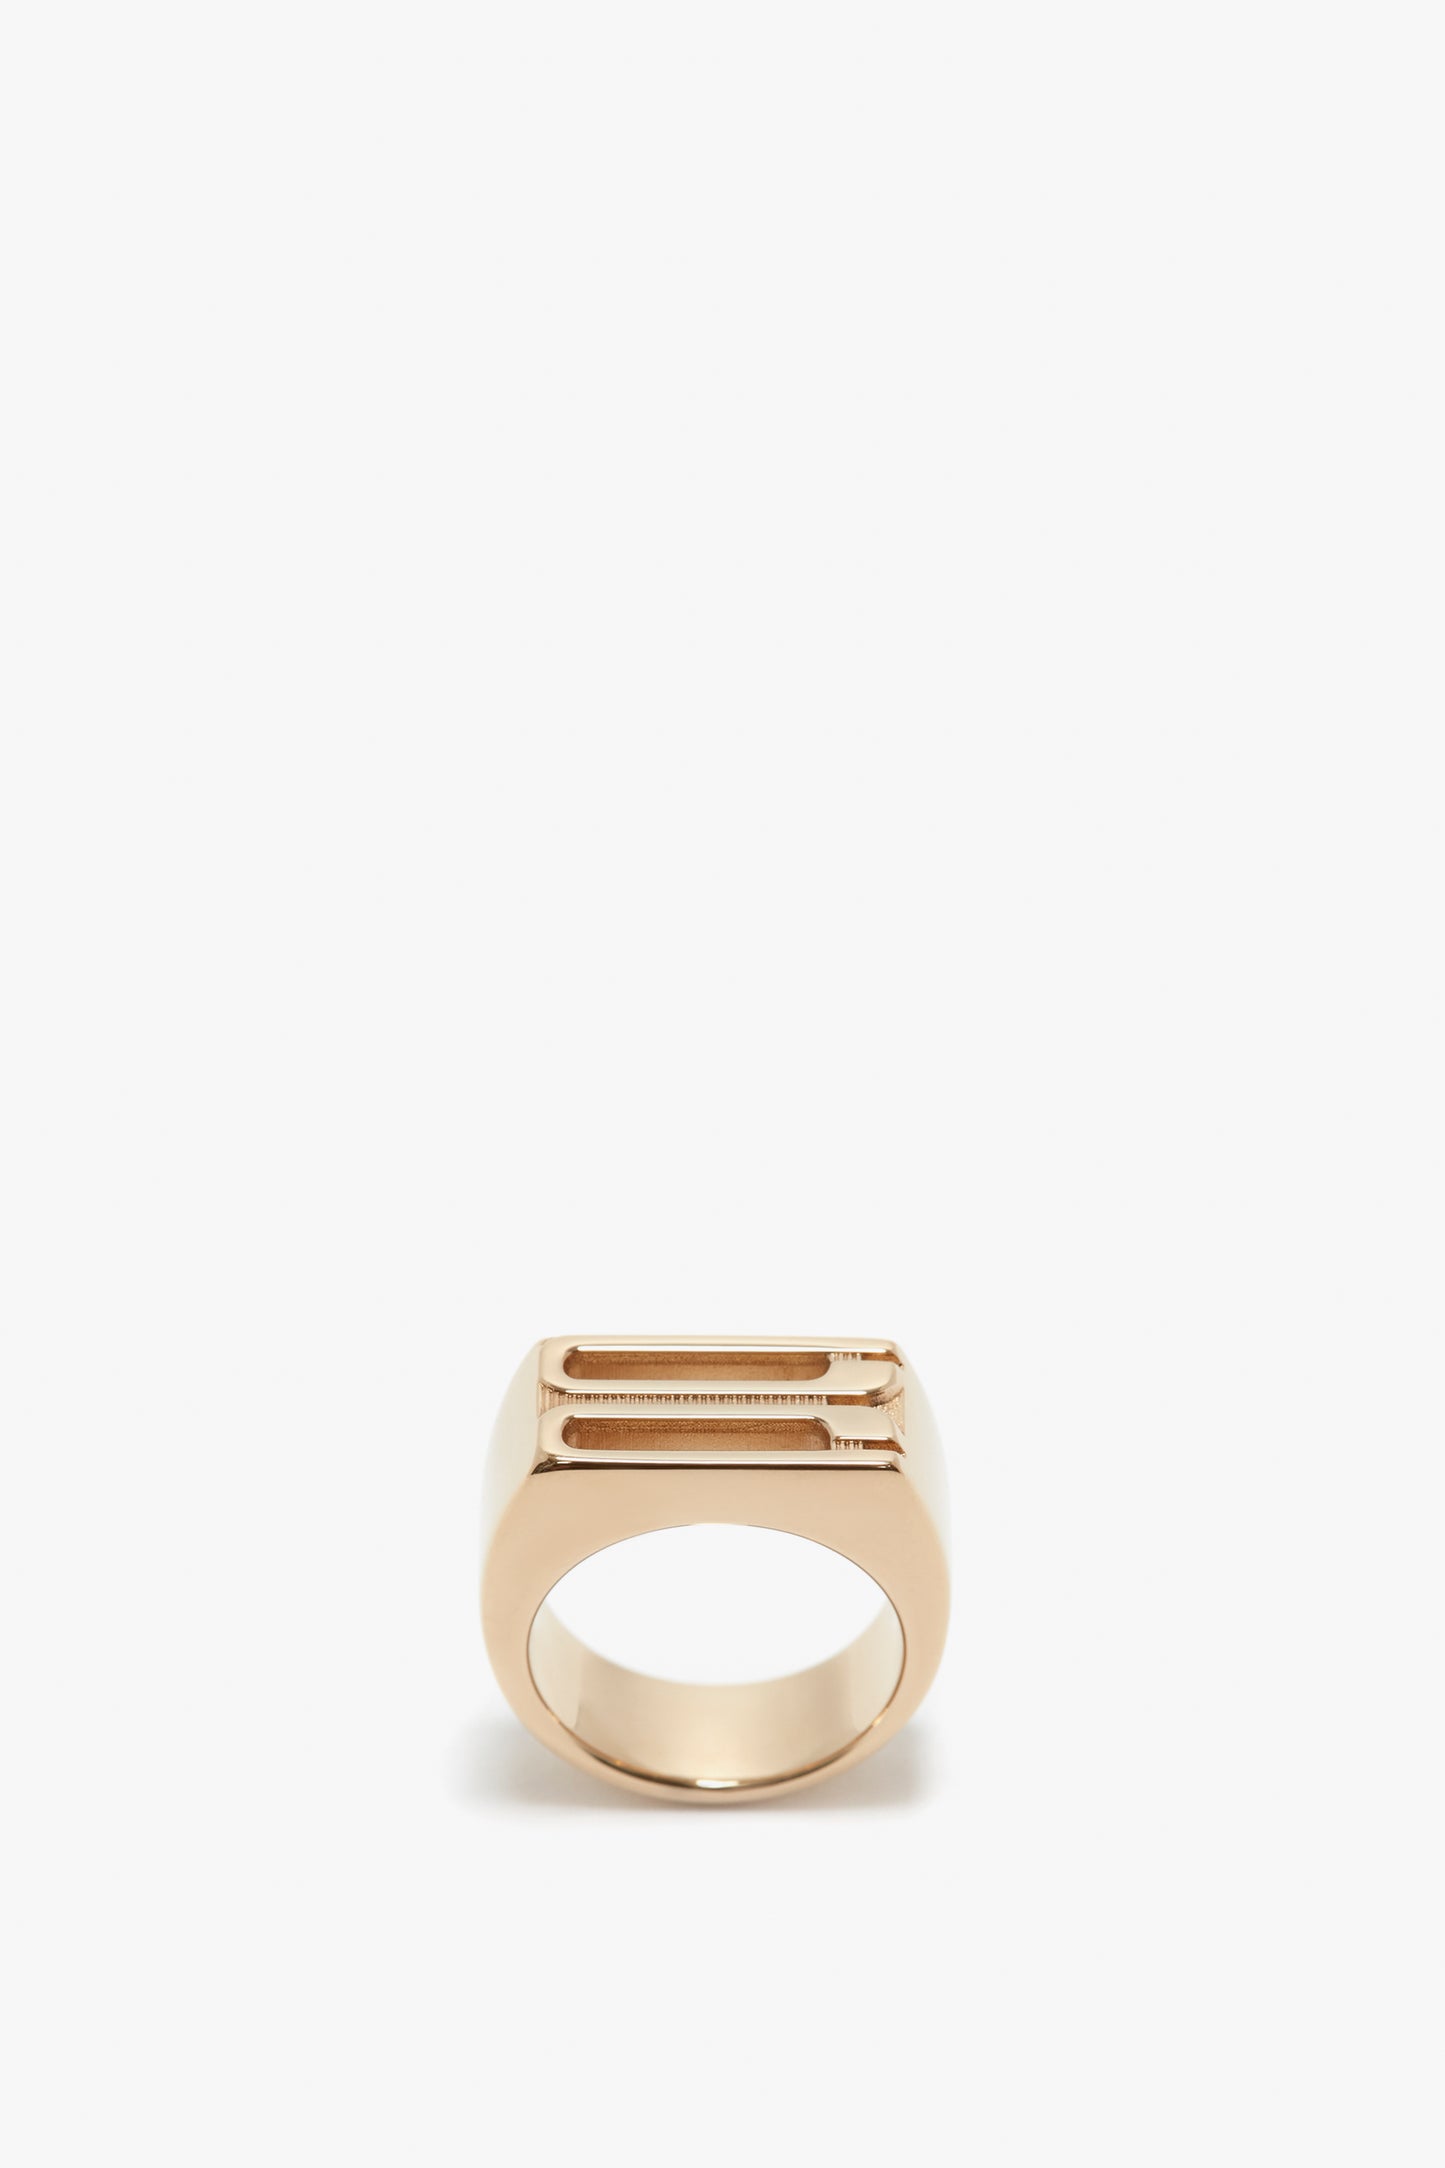 Exclusive Frame Signet Ring In Gold by Victoria Beckham, with a rectangular top plate, isolated on a white background.